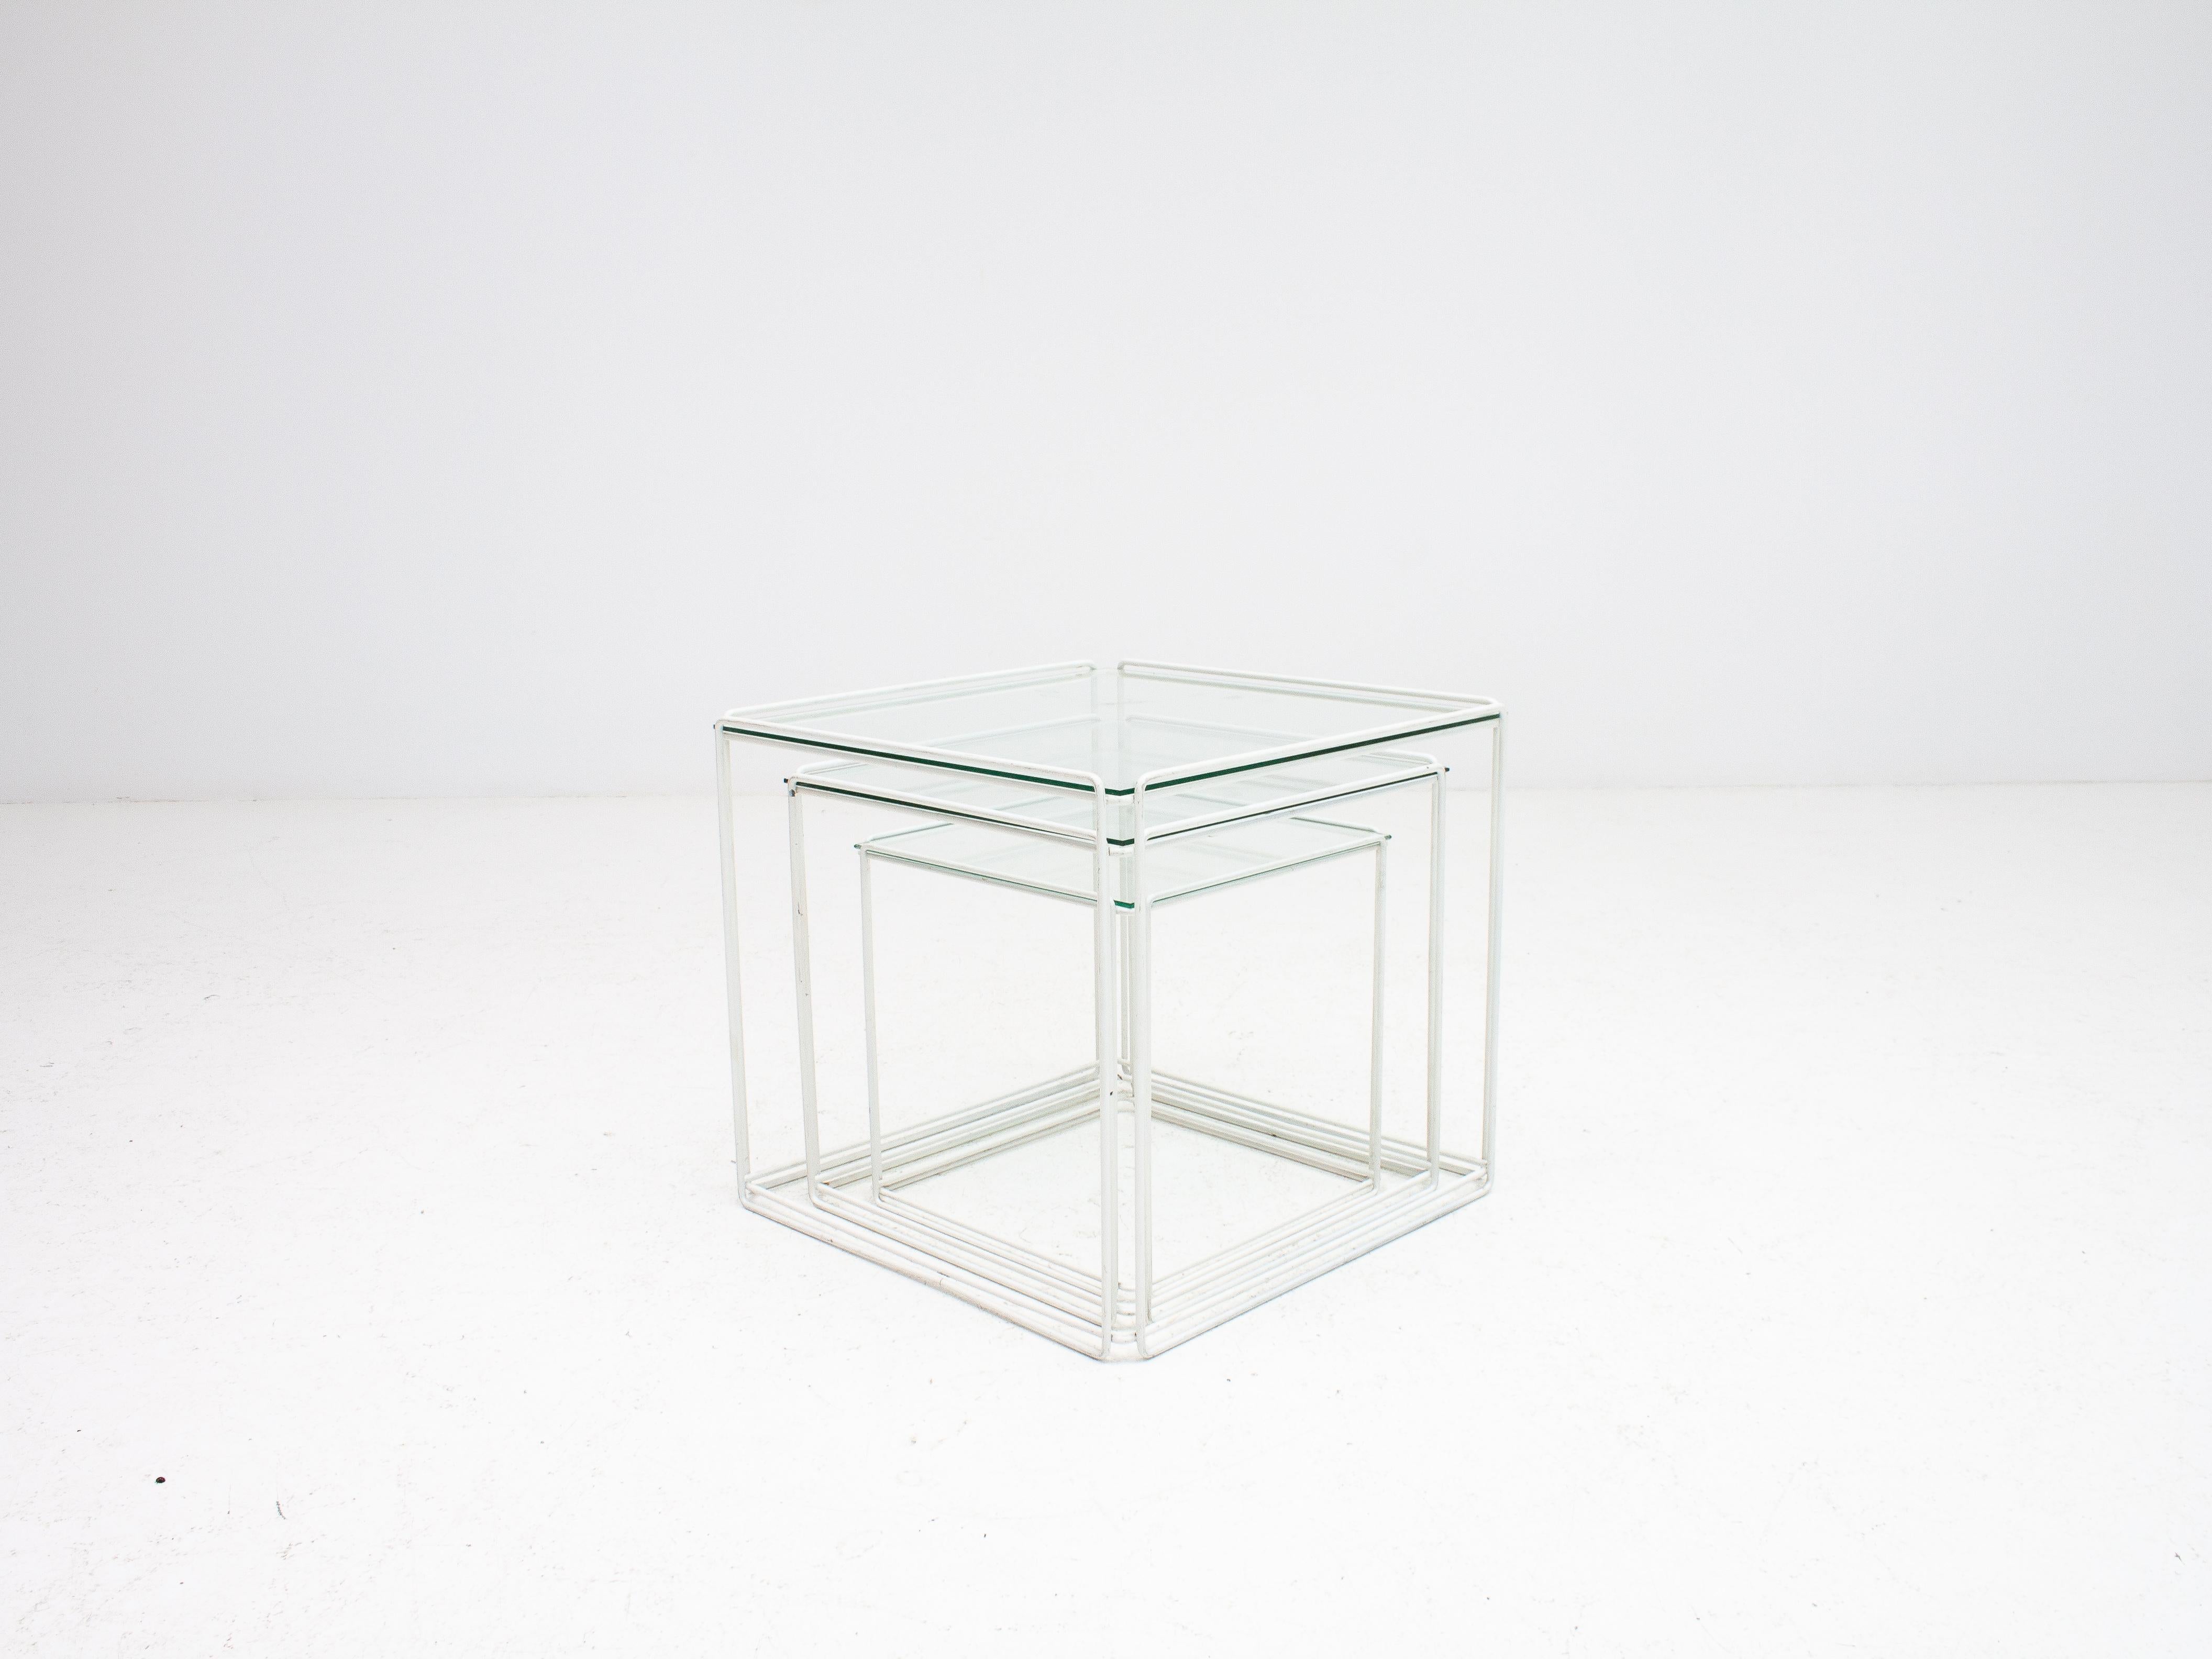 Set of White 'Isoceles' Glass Top Nesting Tables Designed by Max Sauze, 1970s In Fair Condition In London Road, Baldock, Hertfordshire